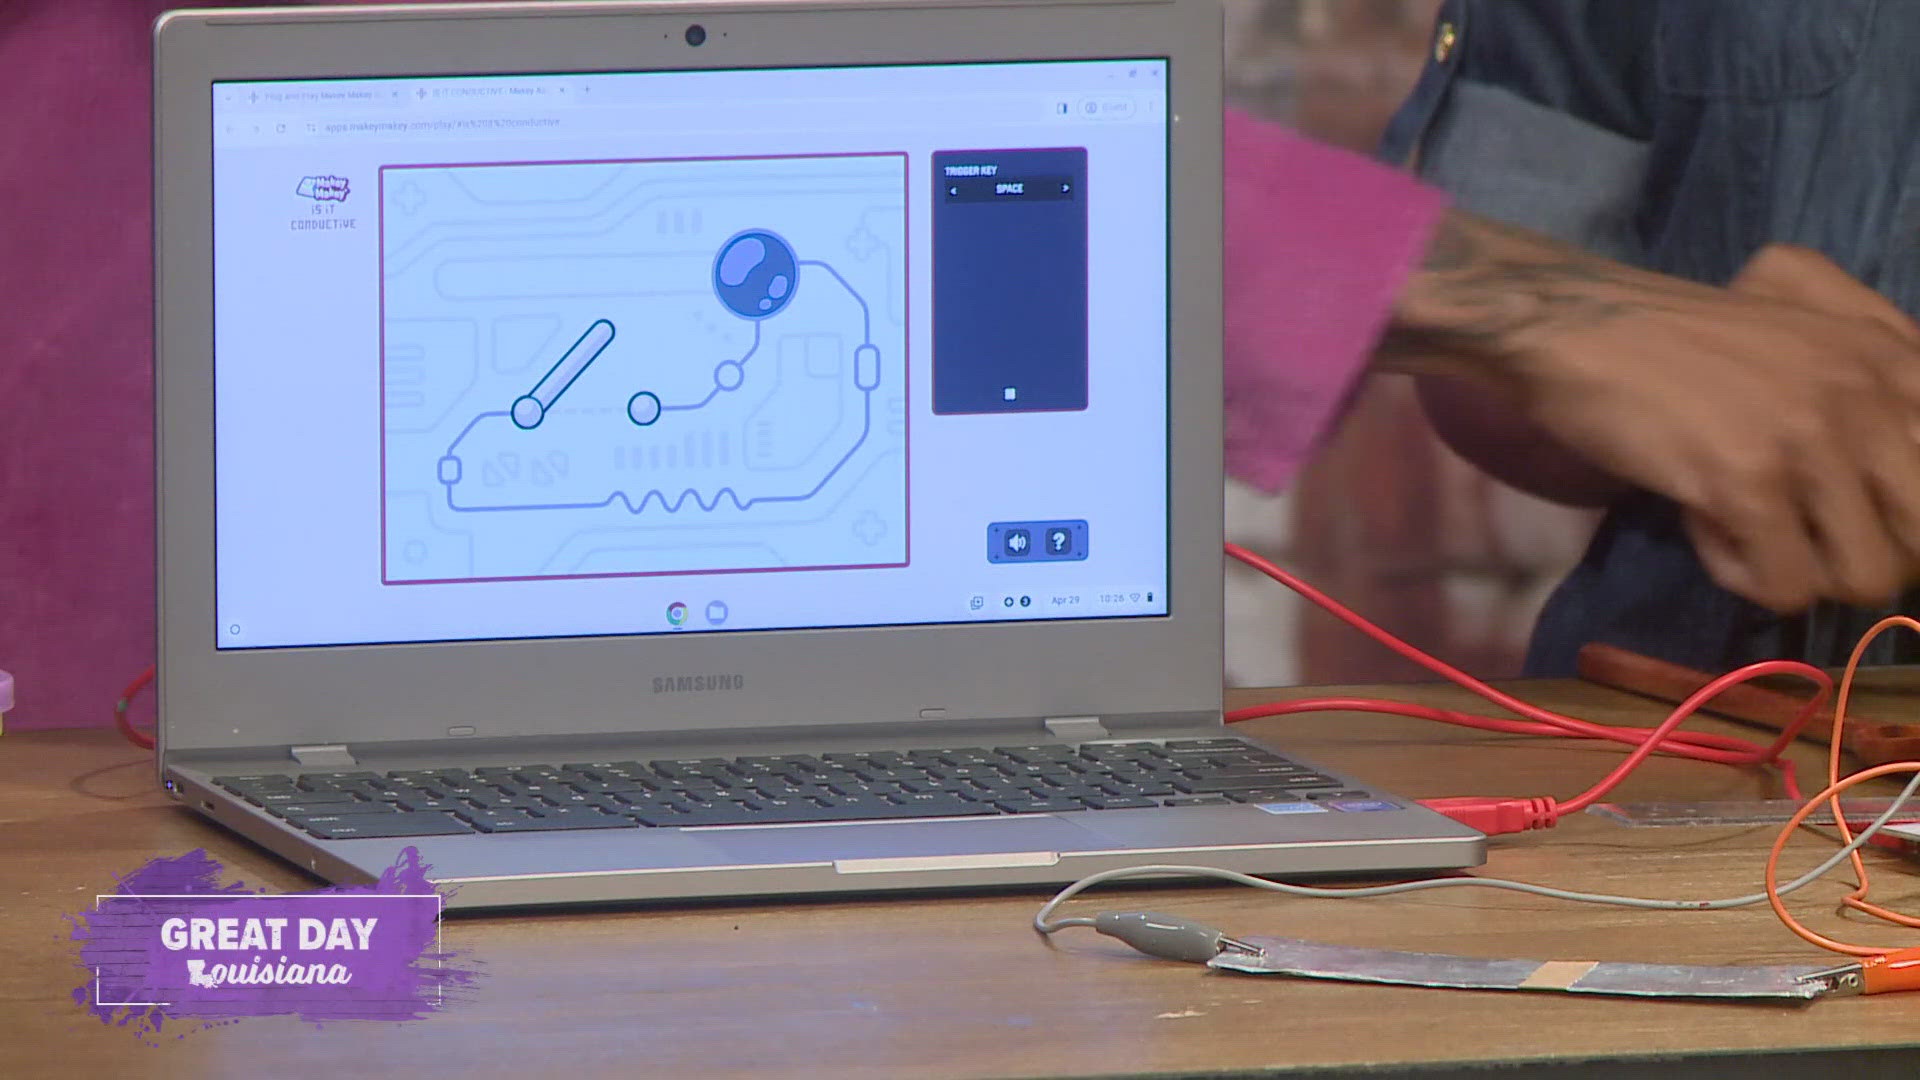 We get a look at some of the hands on fun that helps spark an interest in STEM that they offer at Electric Girls.